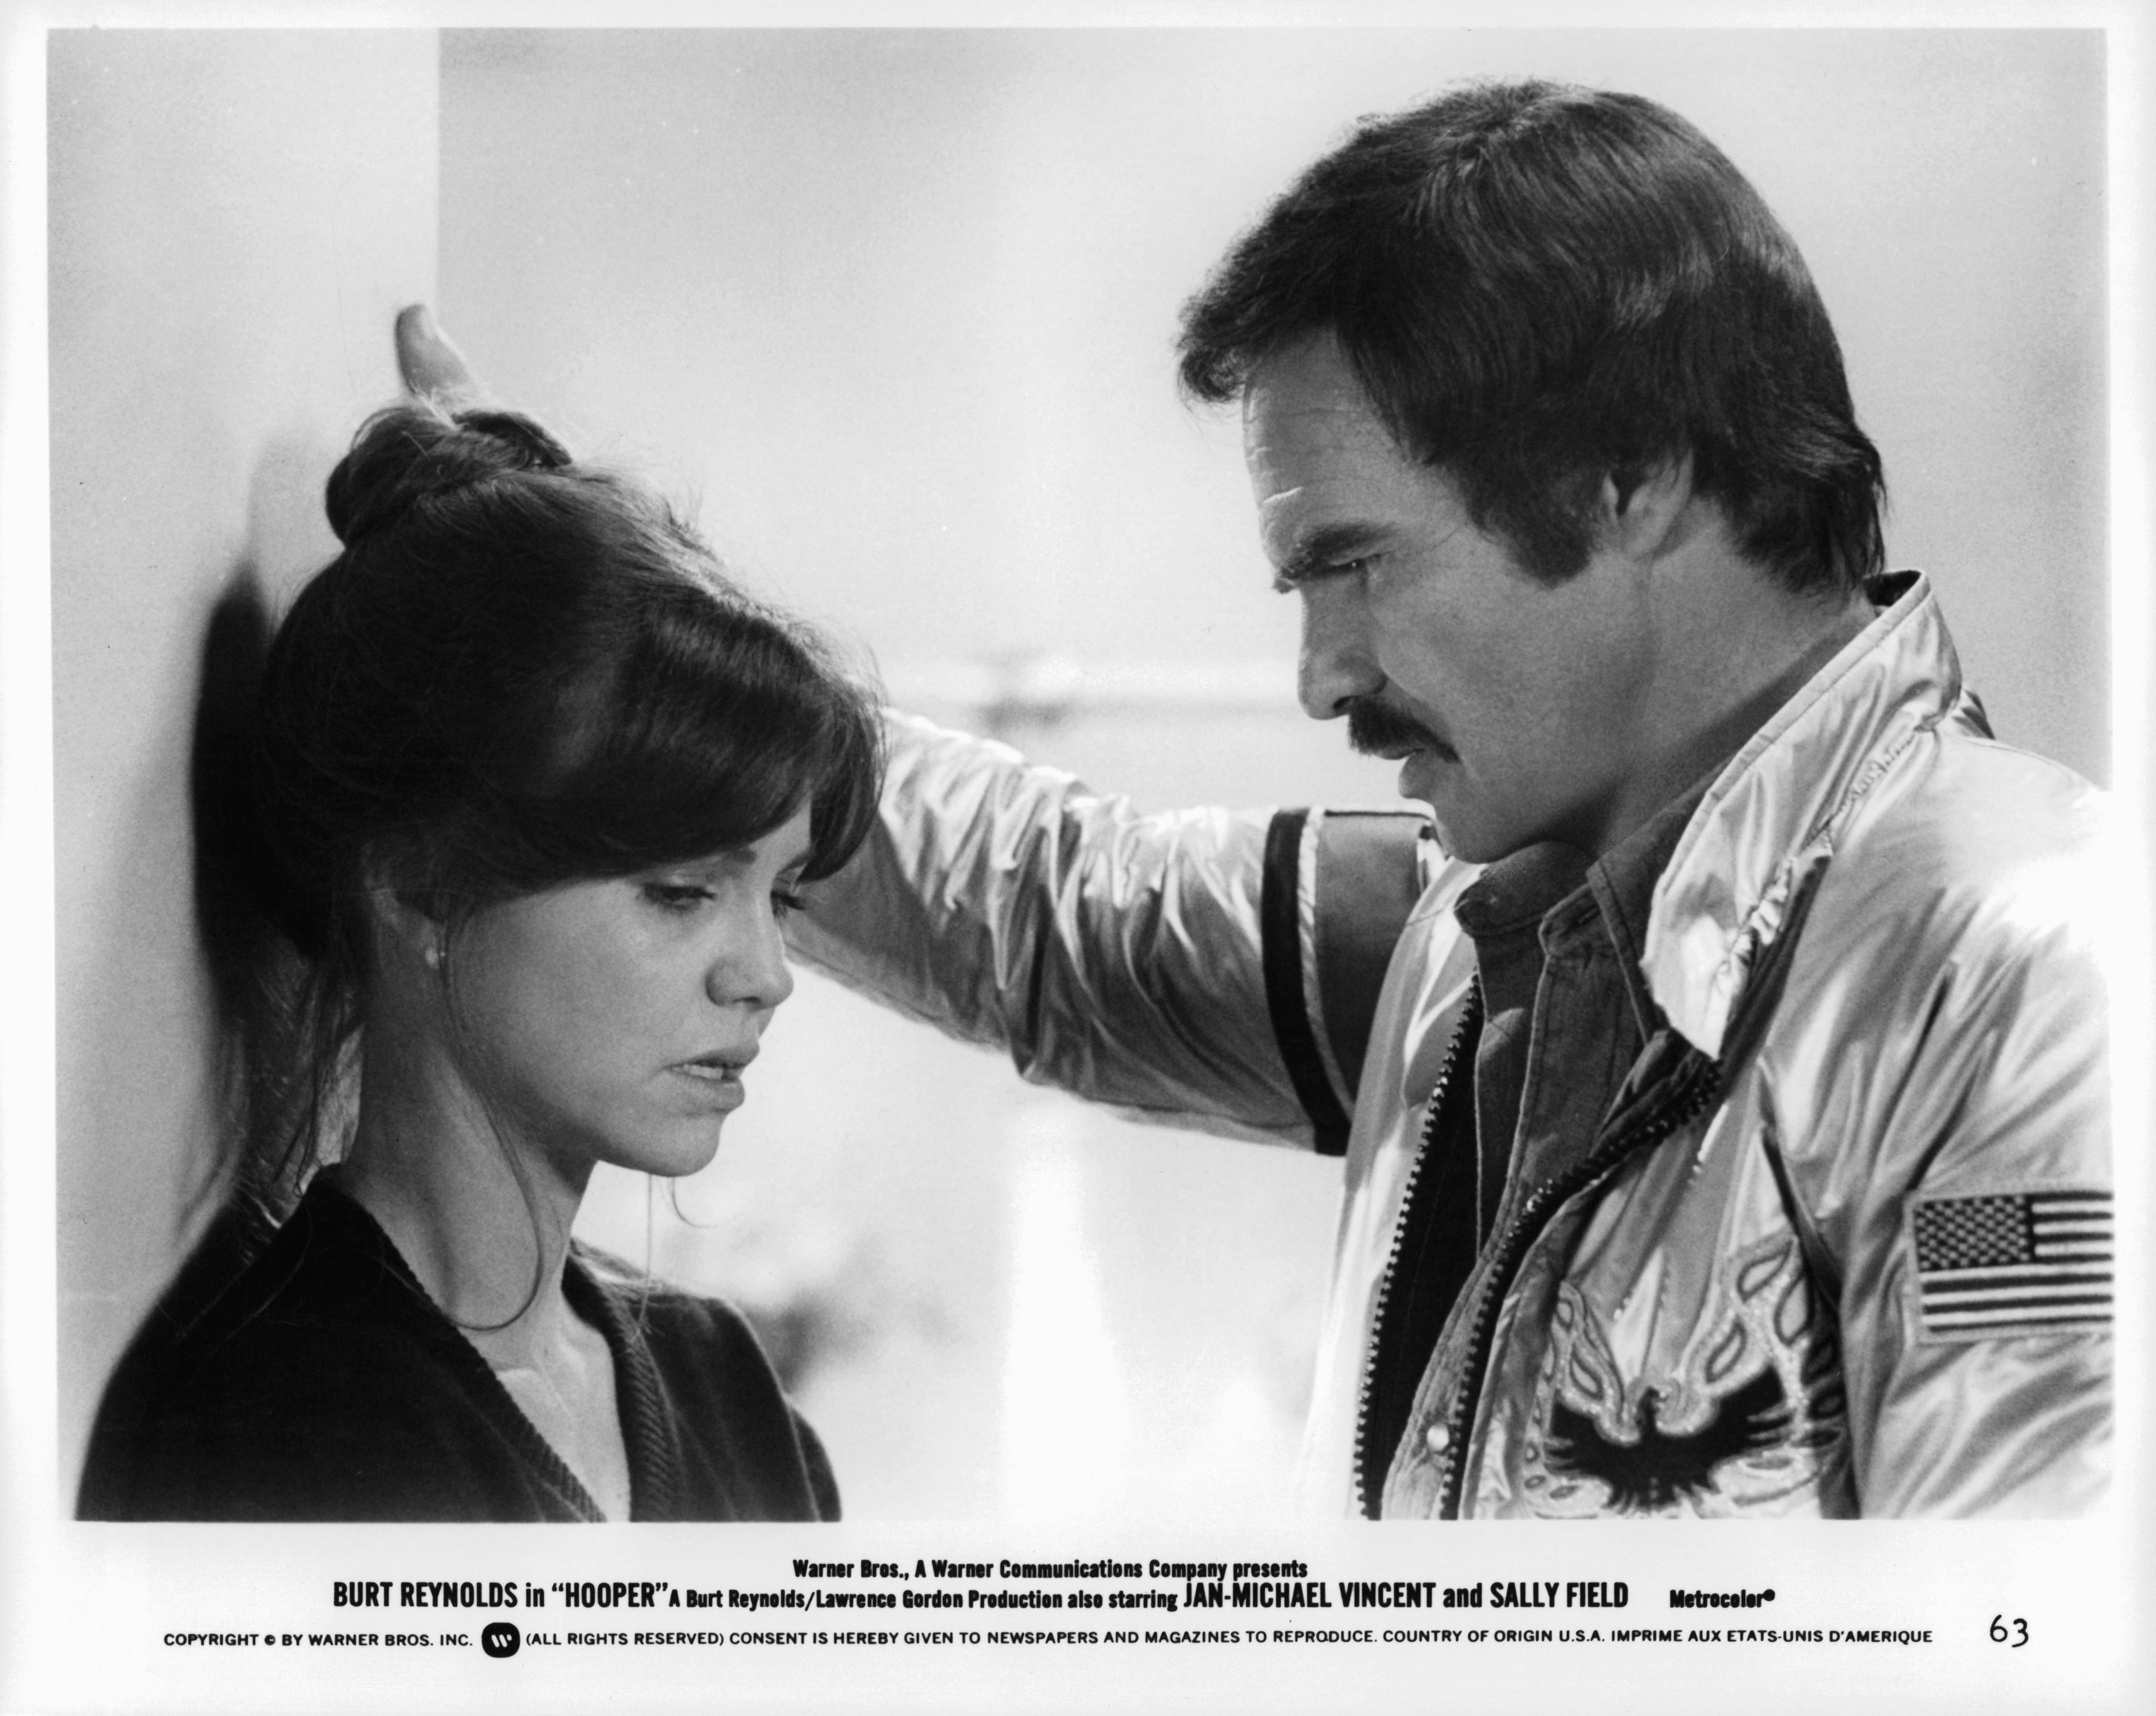 Sally Field as (Gwen Doyle) and Burt Reynolds as (Sonny Hooper) in the 1978 film, "Hooper"┃Source: Getty Images